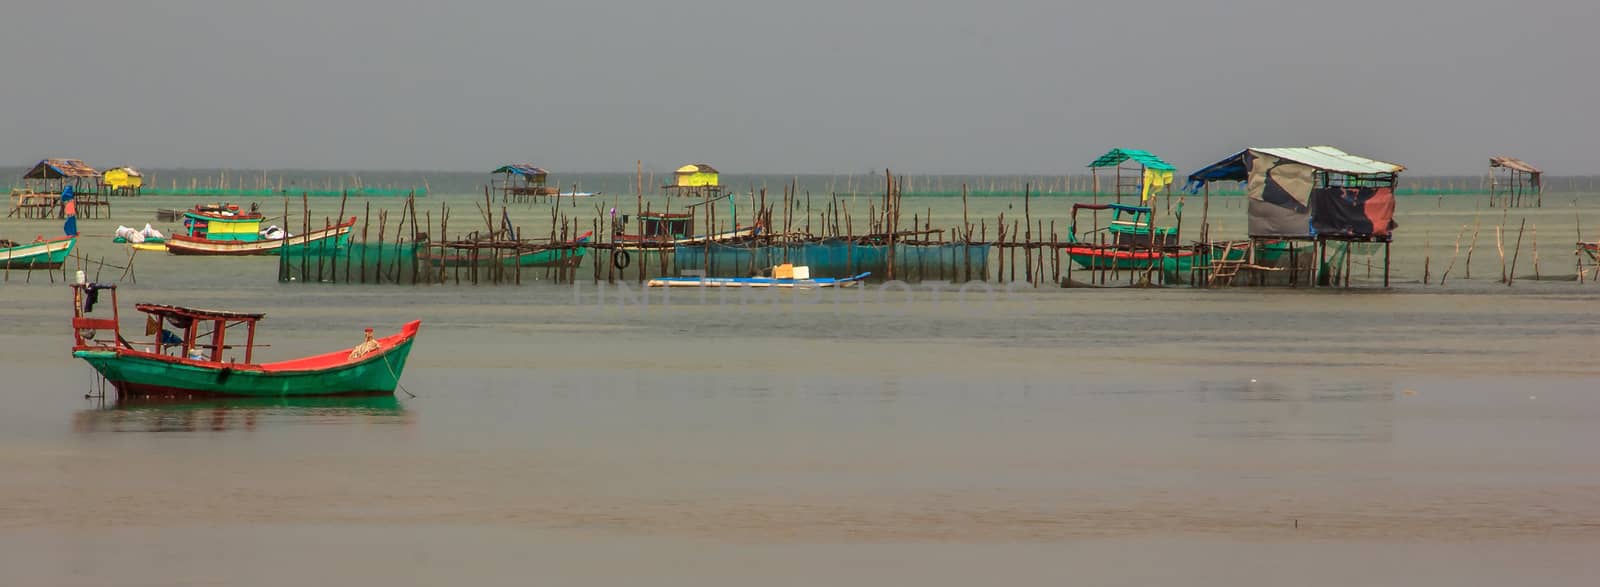 Fishing Boat at Fishing Village on a cloudy day, Phu Quoc, Kien Giang Province, Vietnam by victorflowerfly